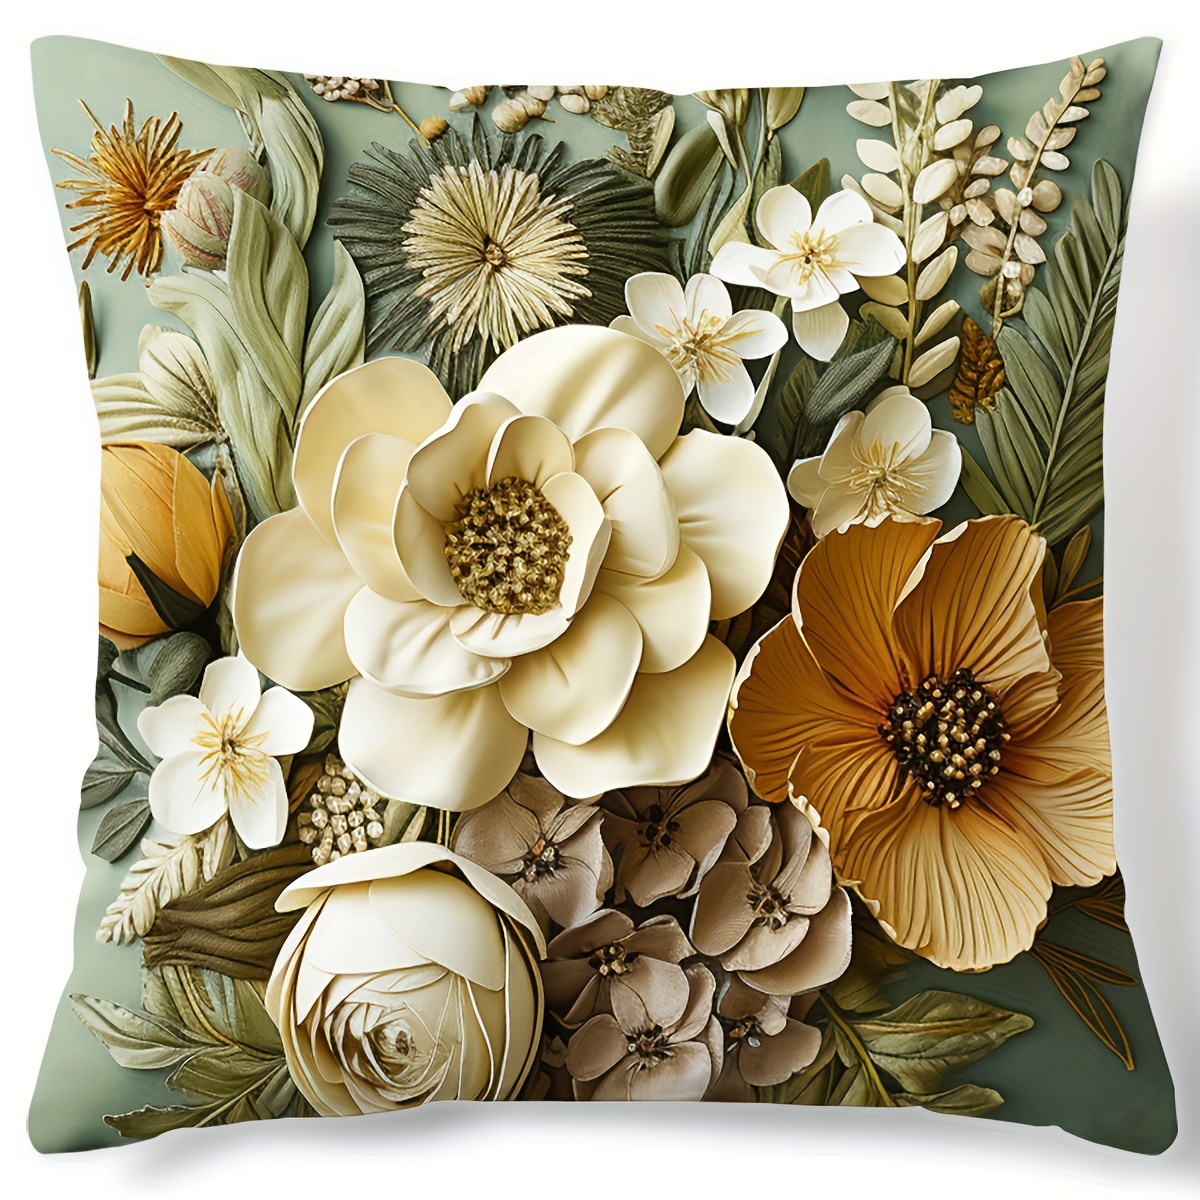 

1pc Contemporary Style Floral Botanical Pattern Digital Print Cushion Cover, Decorative Throw Pillow Case For Home & Living Room Decor, 18x18 Inches